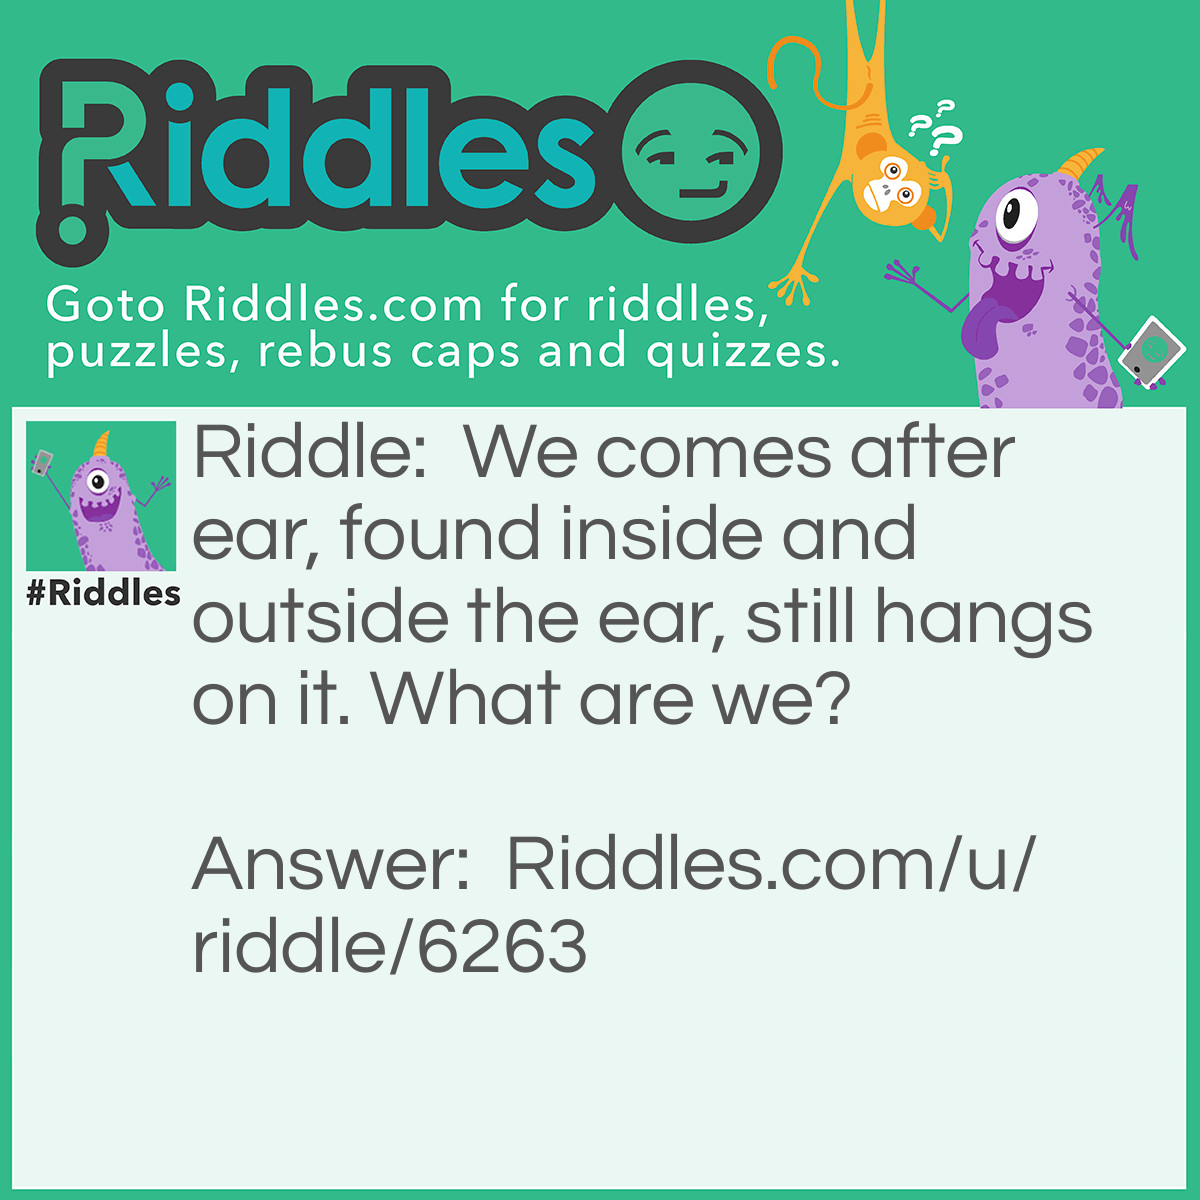 Riddle: We comes after ear, found inside and outside the ear, still hangs on it. What are we? Answer: earRINGS!